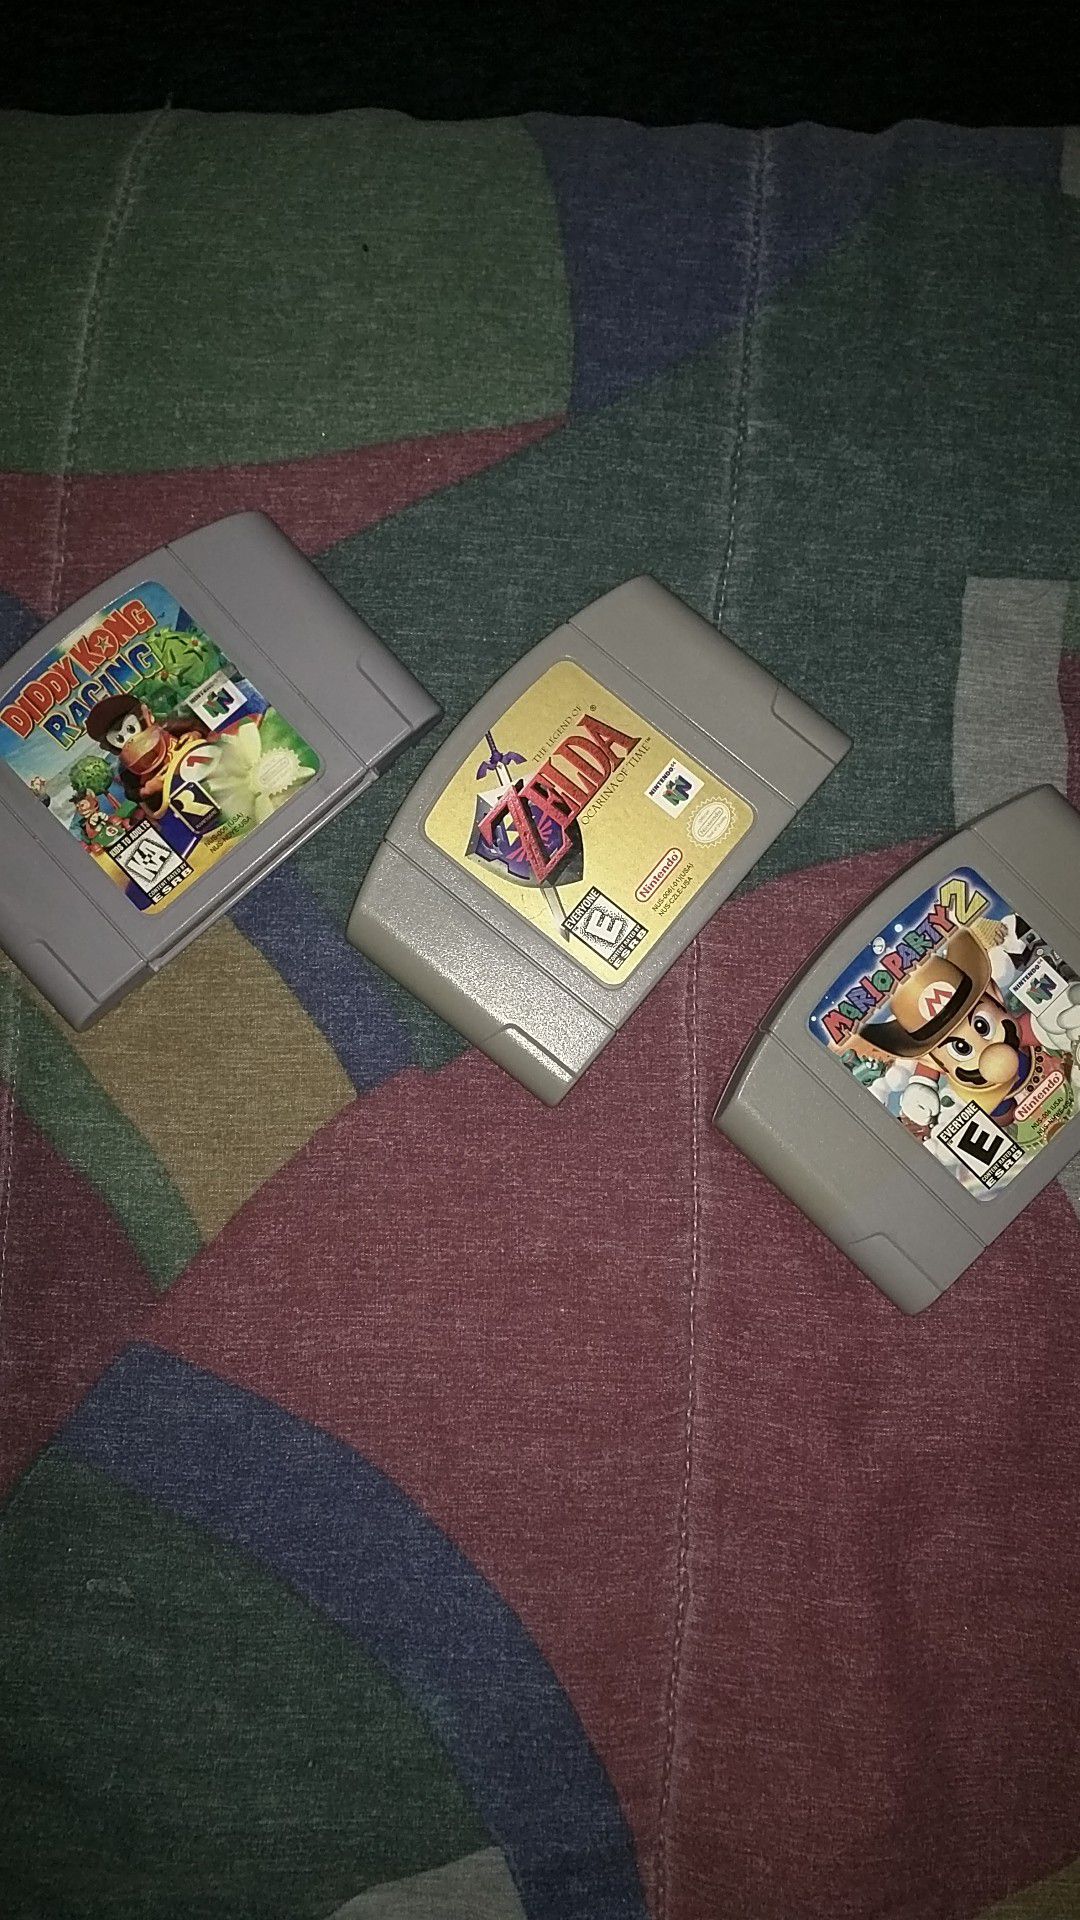 Awesome Nintendo 64 Games!